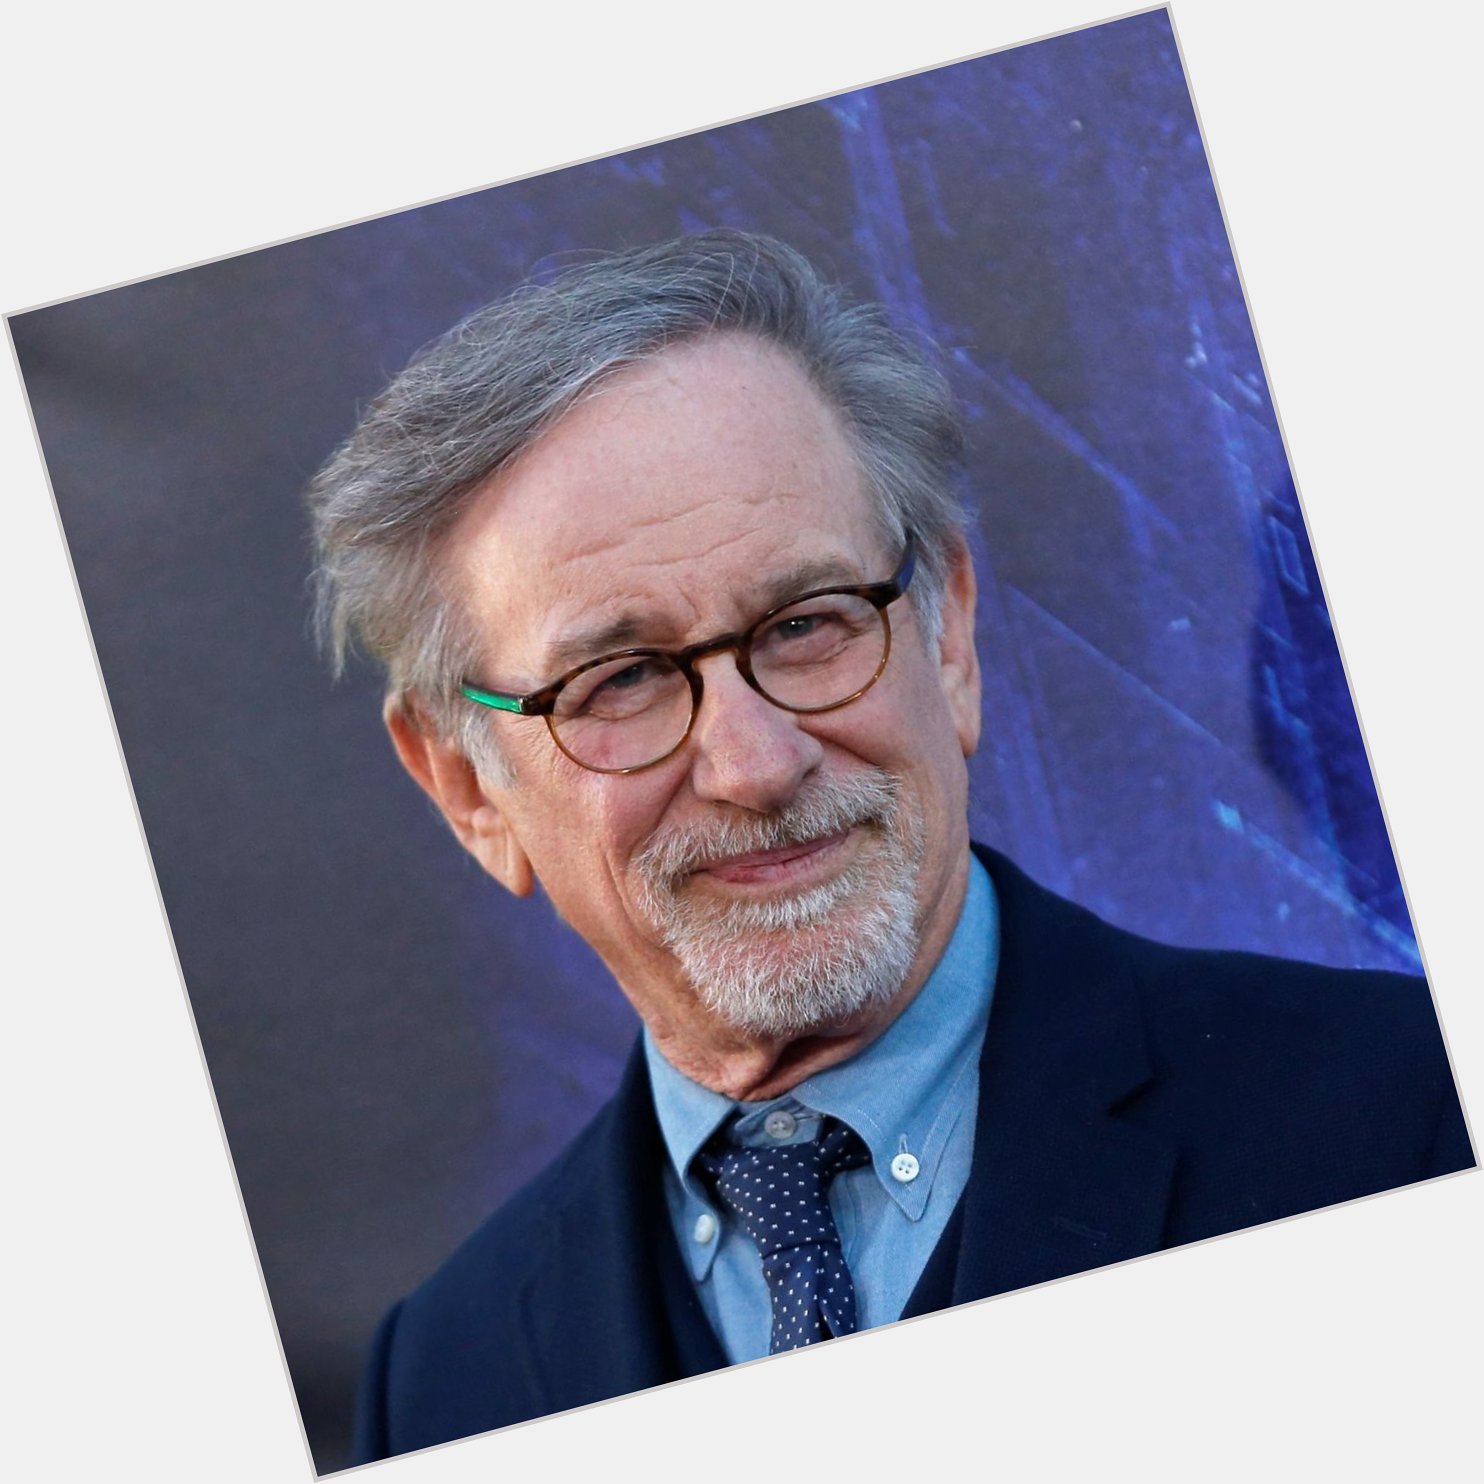 Happy birthday to one of the most legendary movie directors of all time, Steven Spielberg ! 